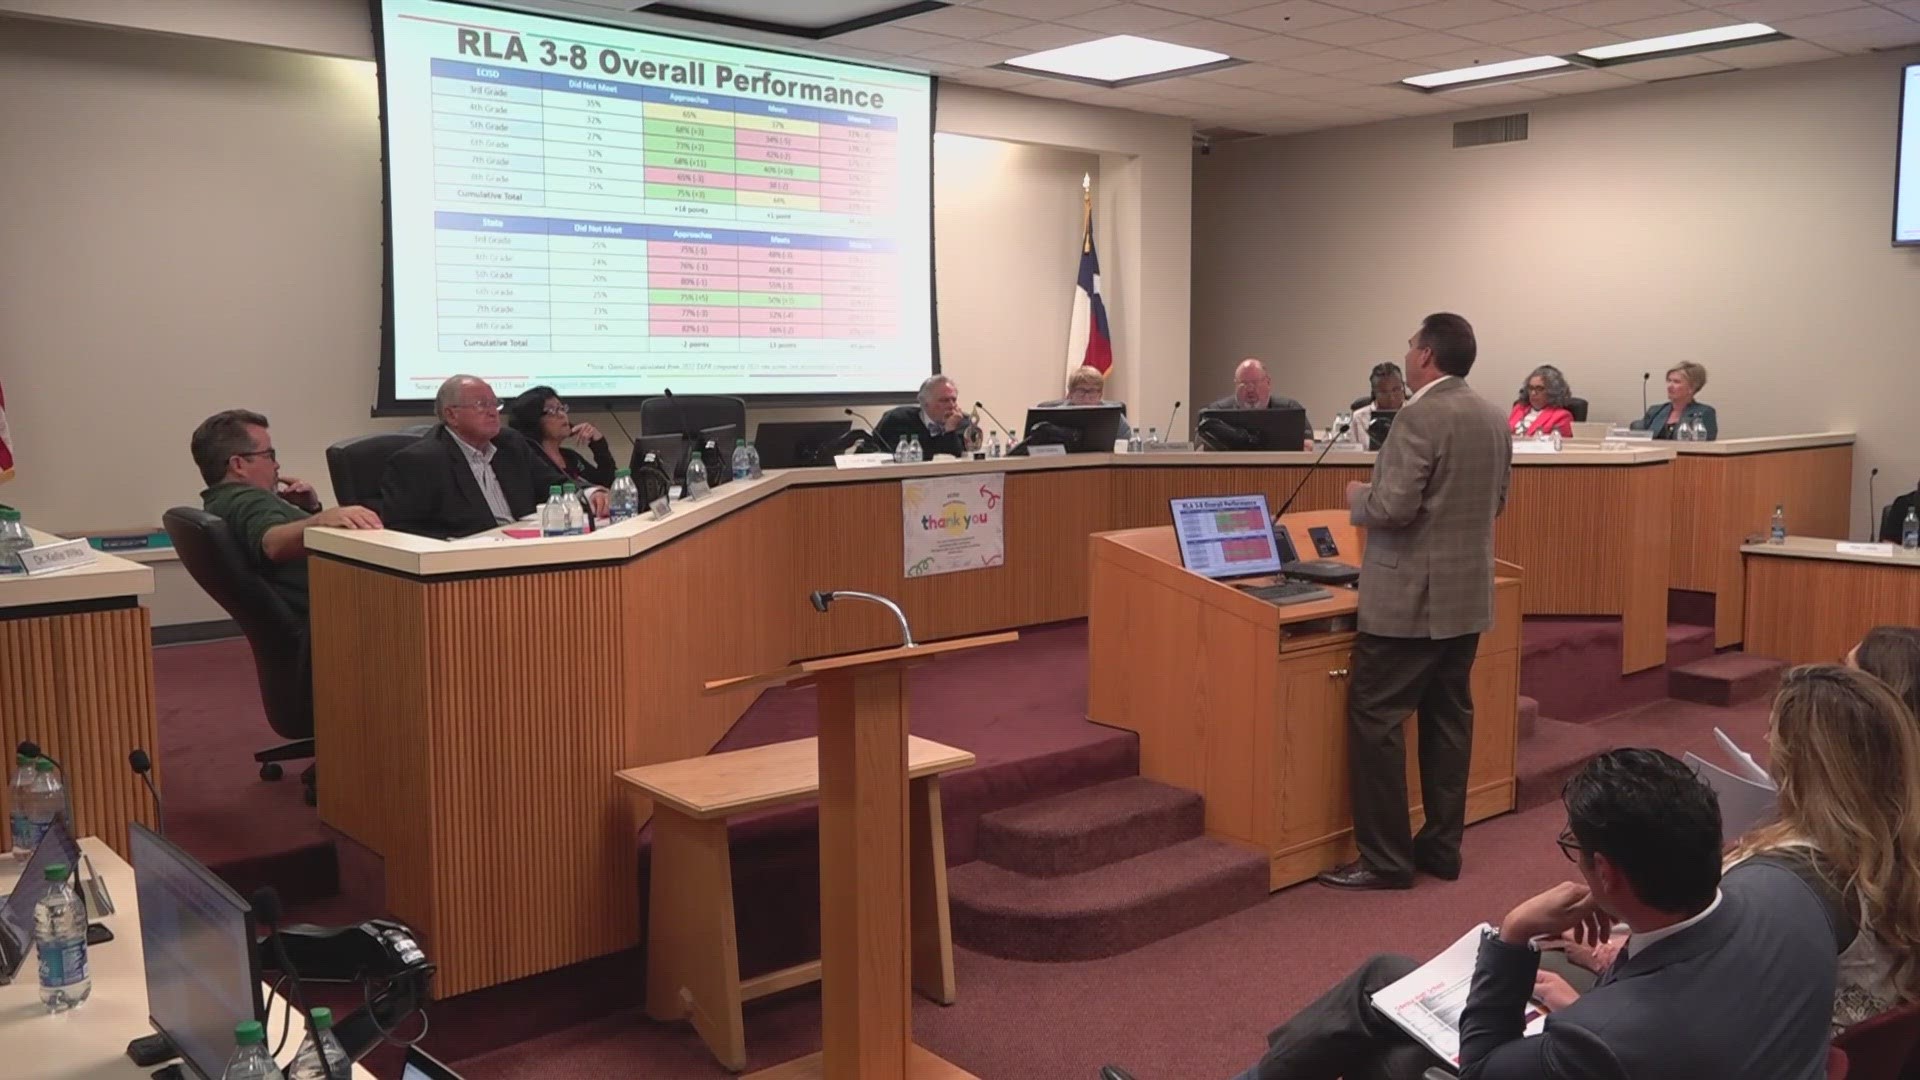 The ECISD Board of Trustees held a workshop on Tuesday night where they announced the extension of Dr. Scott Muri's contract